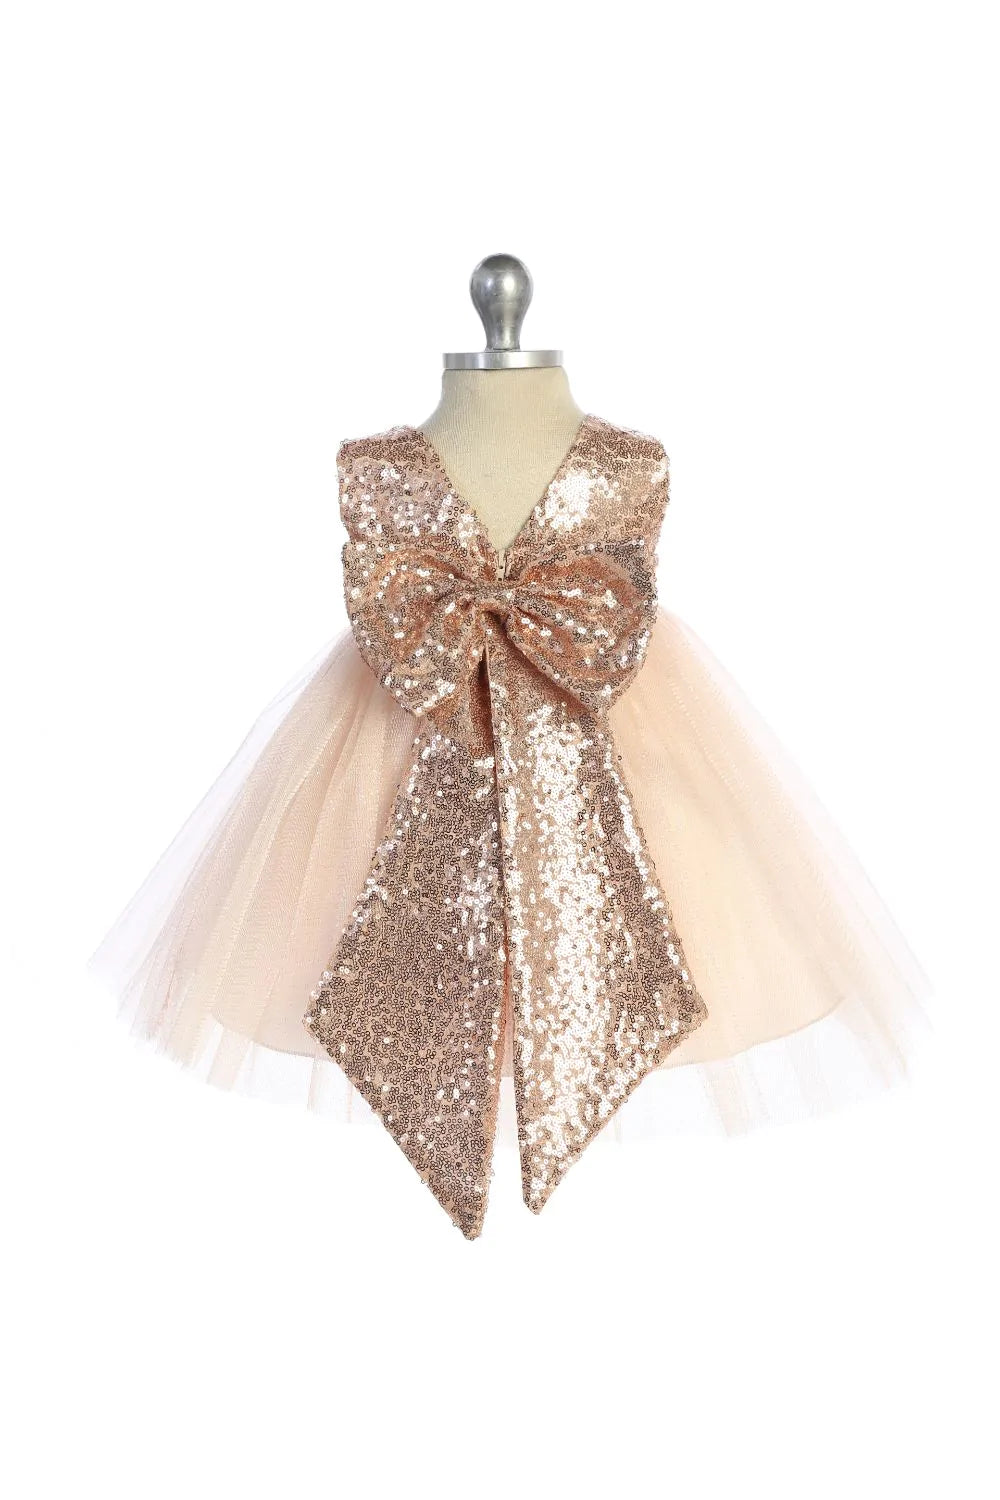 Dupioni Bodice with V back gold sequin bow 498B Baby Dress